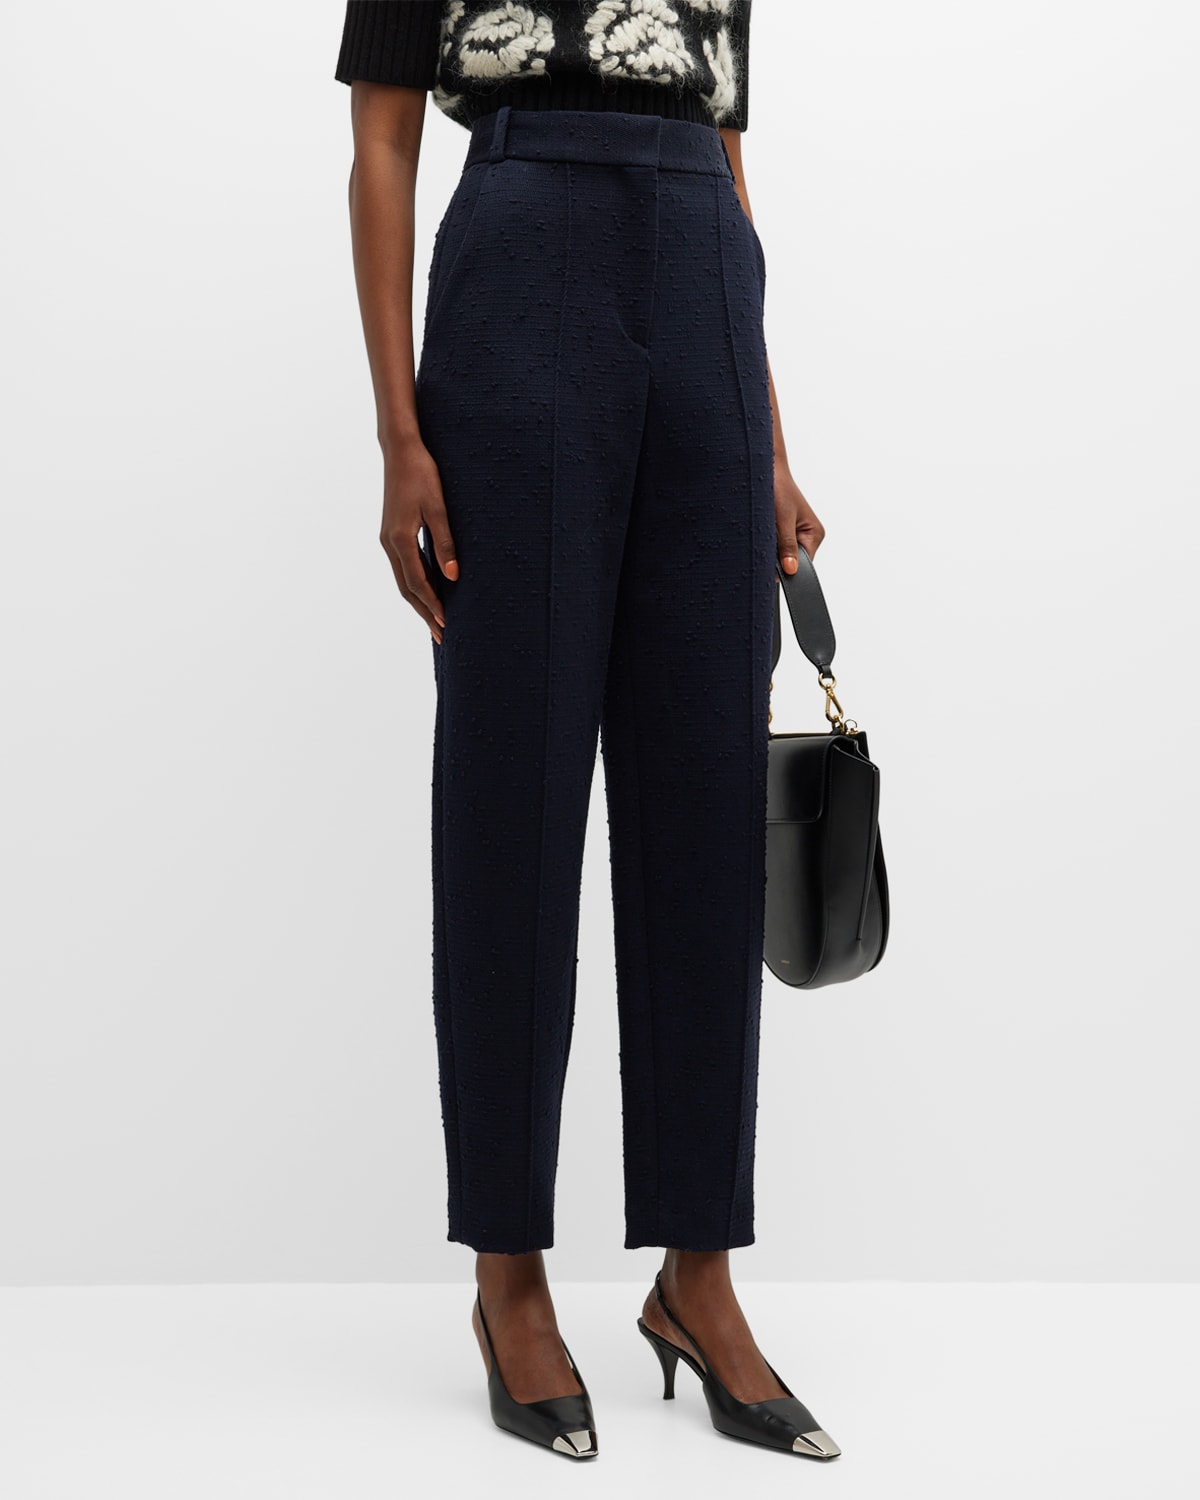 Tory Burch Cropped Flare Twill Trousers | Neiman Marcus